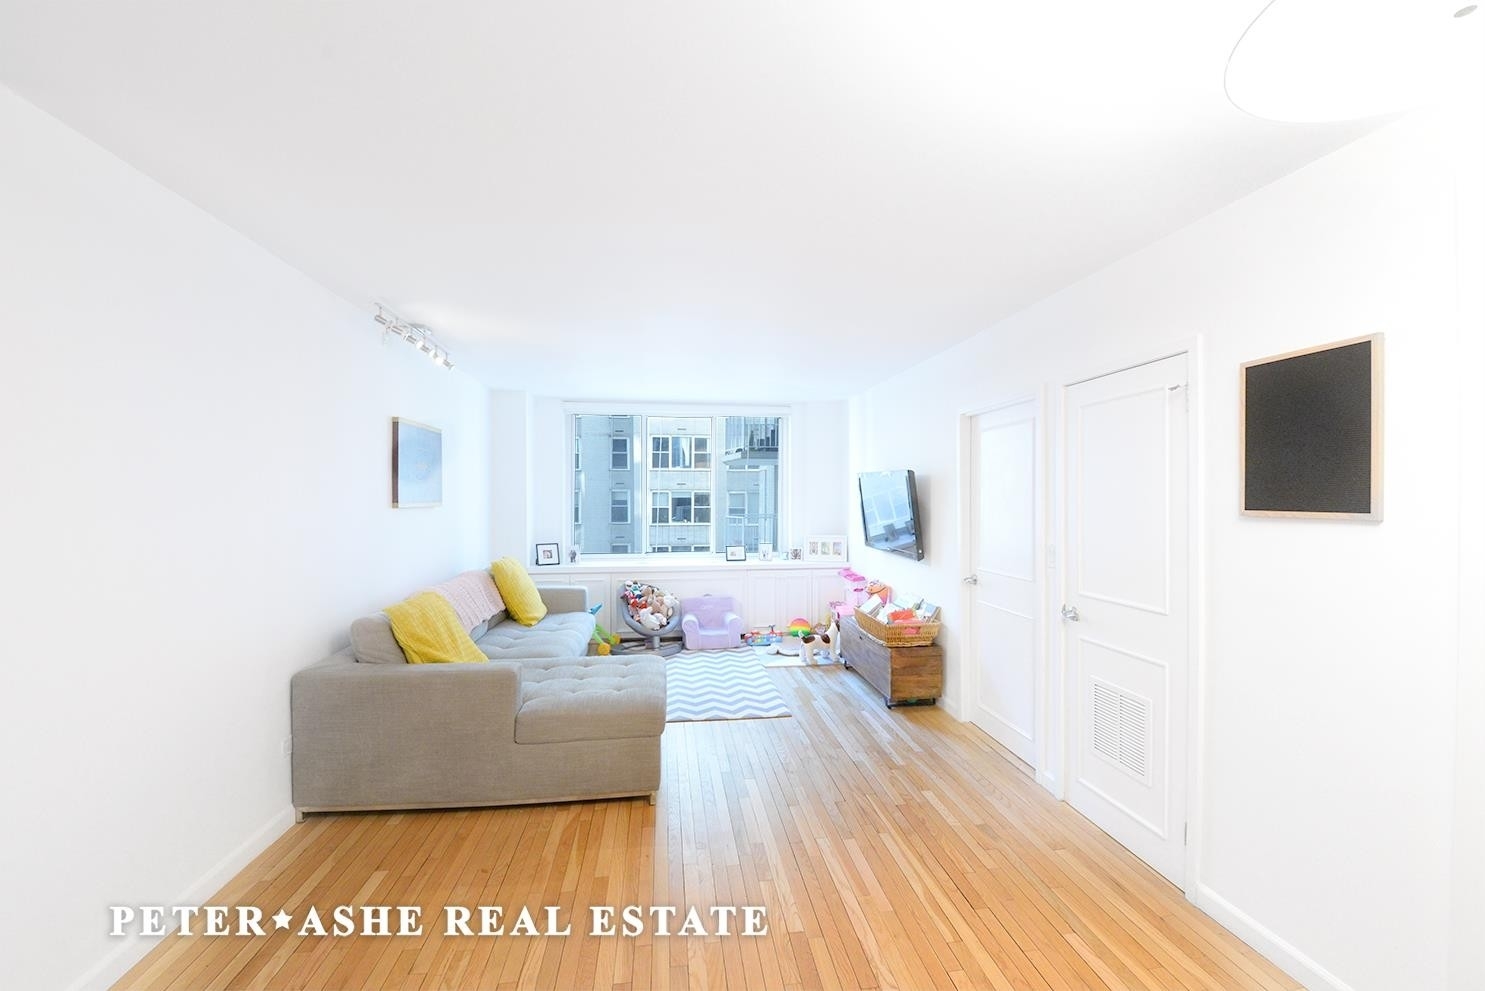 Property for Sale at Lenox Hill, New York, New York 10065